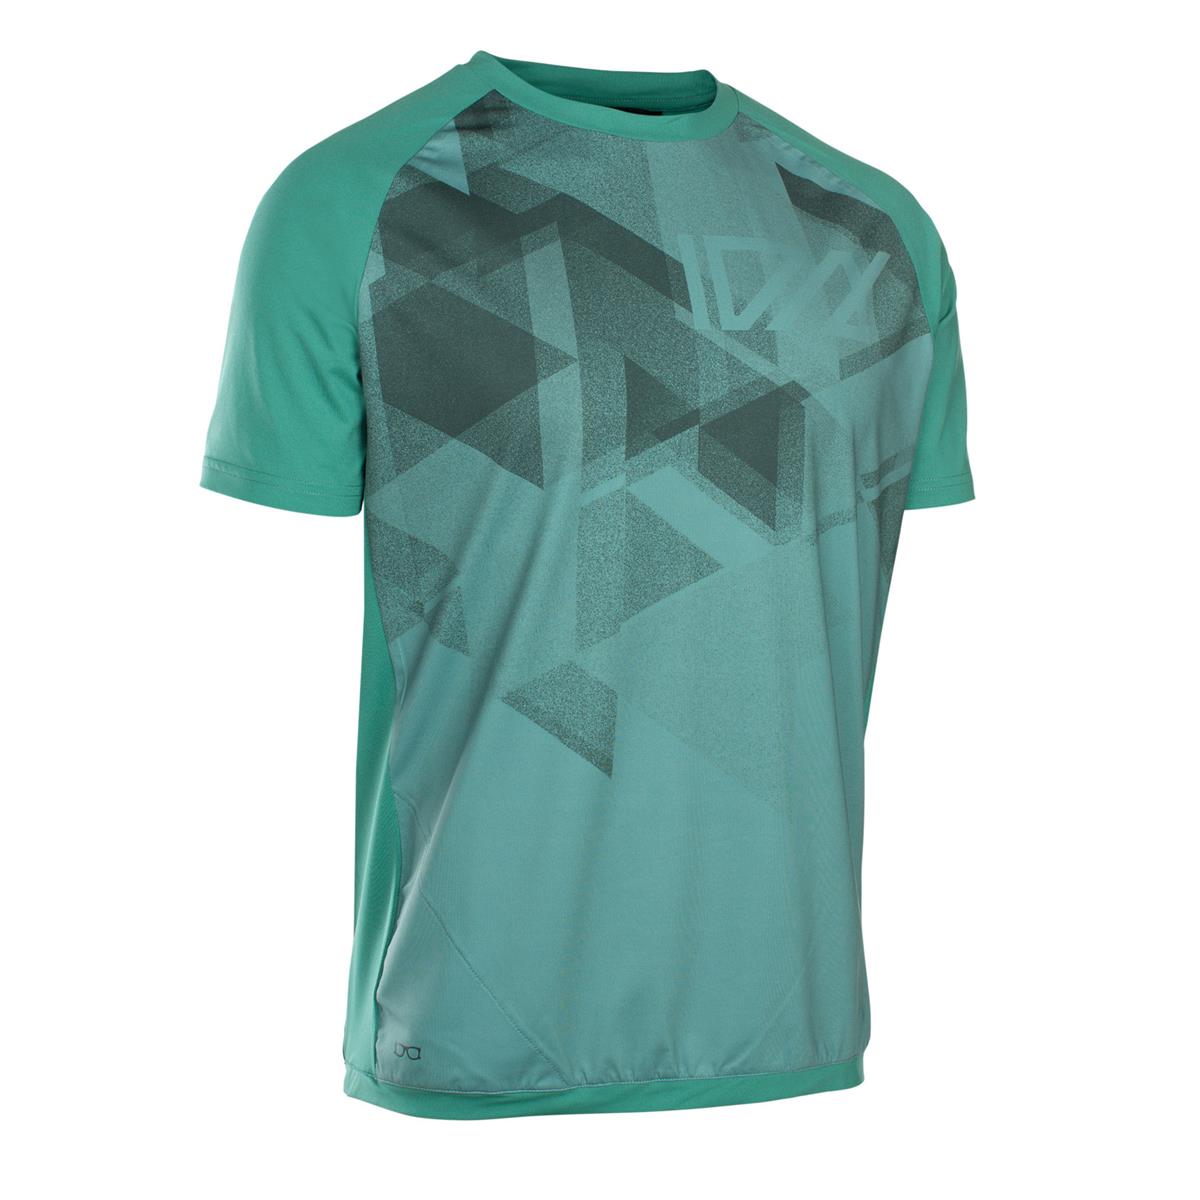 ION Maillot VTT Manches Courtes Traze AMP Sea Green